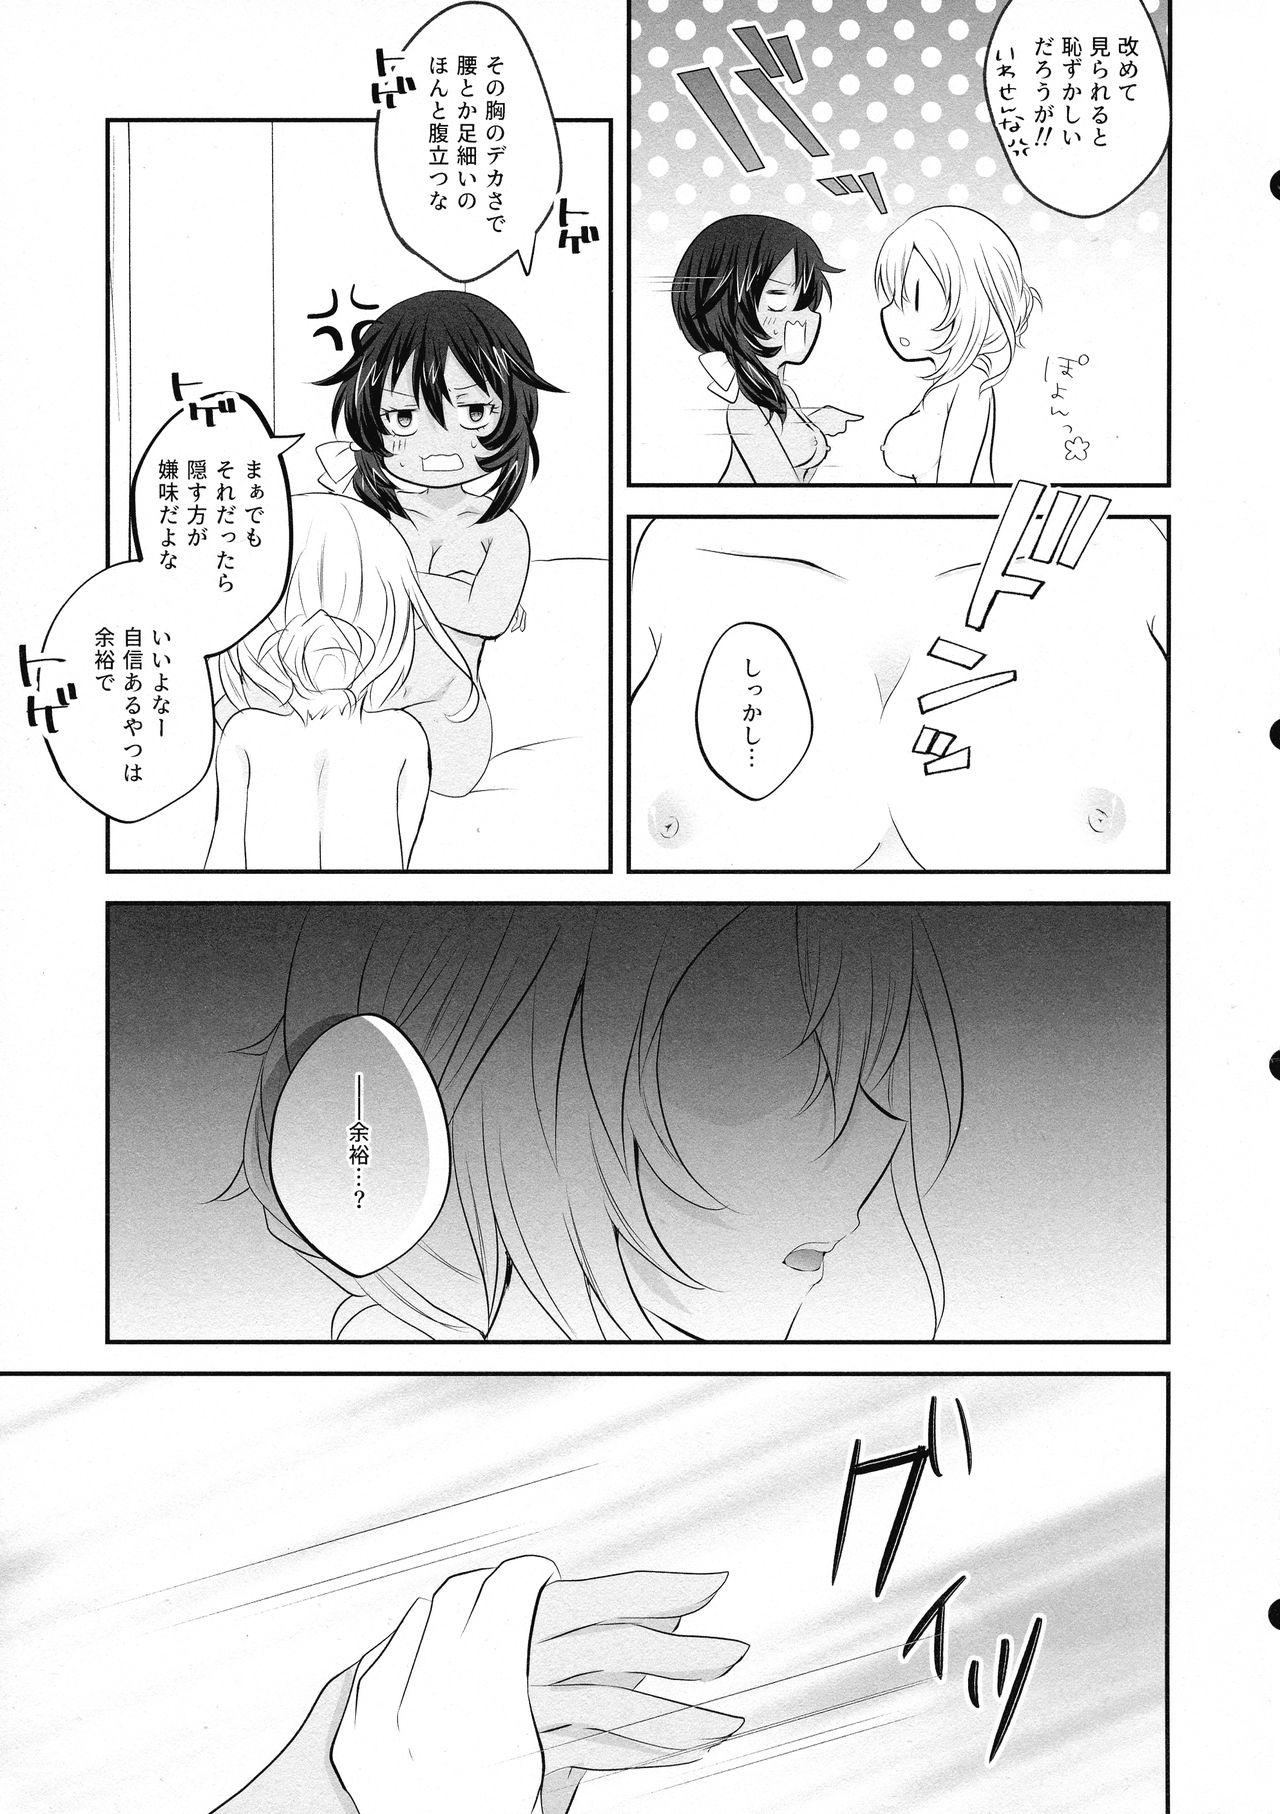 Bubble Moonlight Melody - Girls und panzer Gay Straight - Page 11